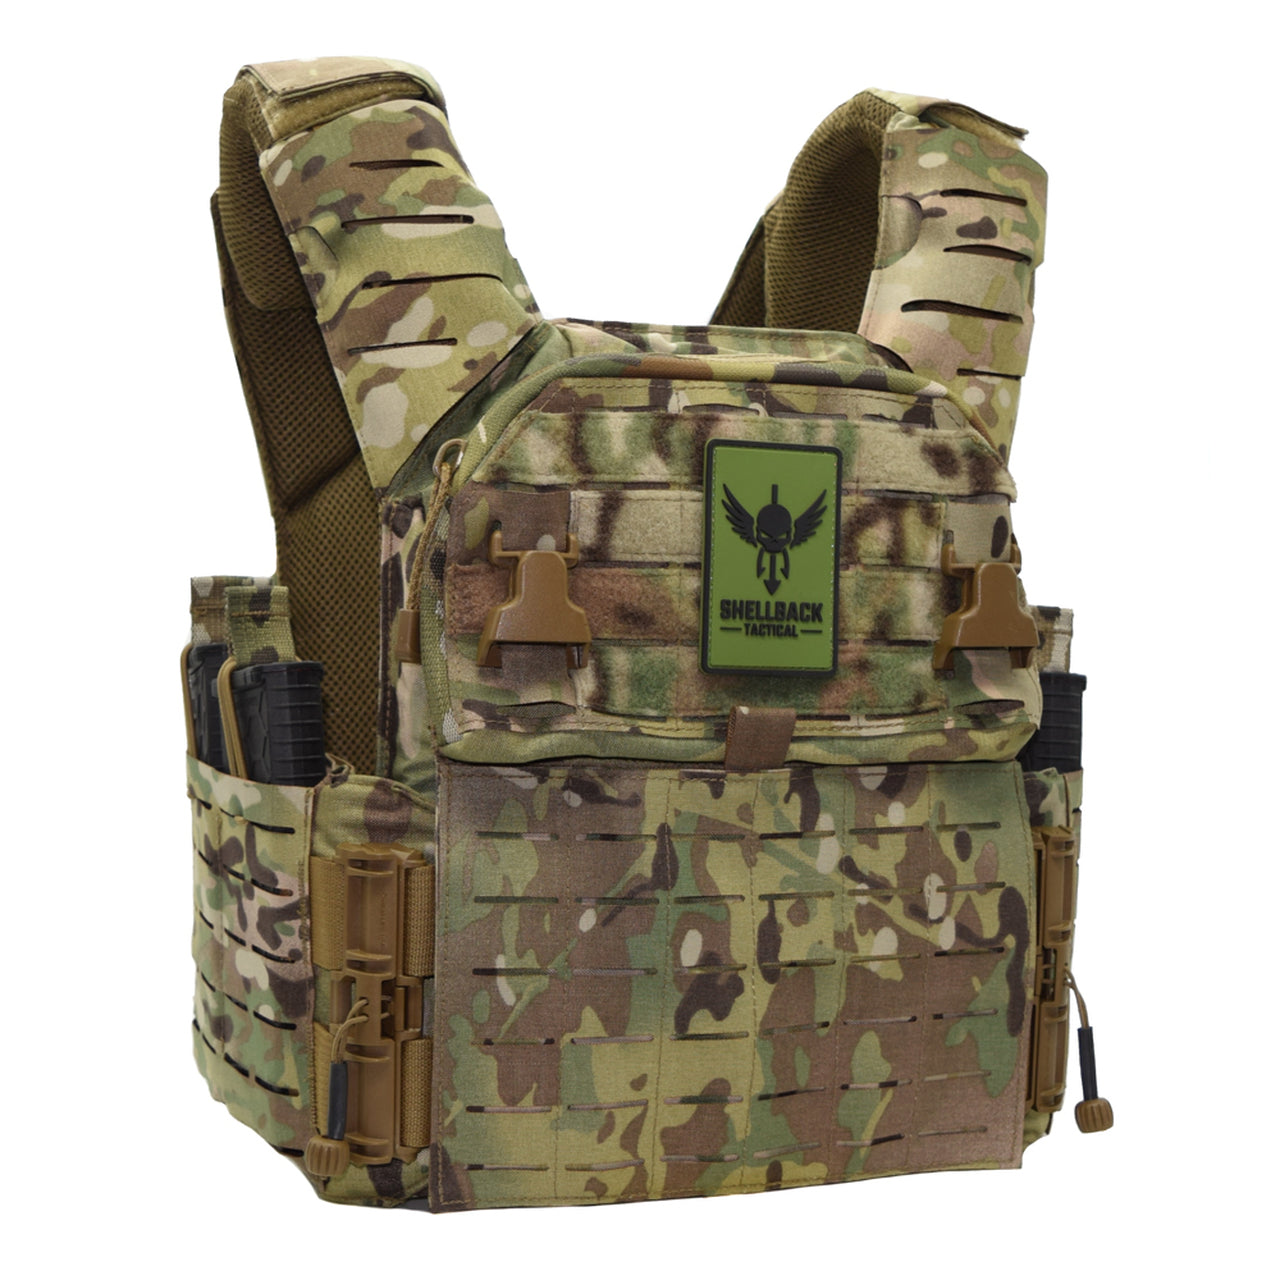 A Shellback Tactical Banshee Elite 3.0 Plate Carrier with a camouflage design.